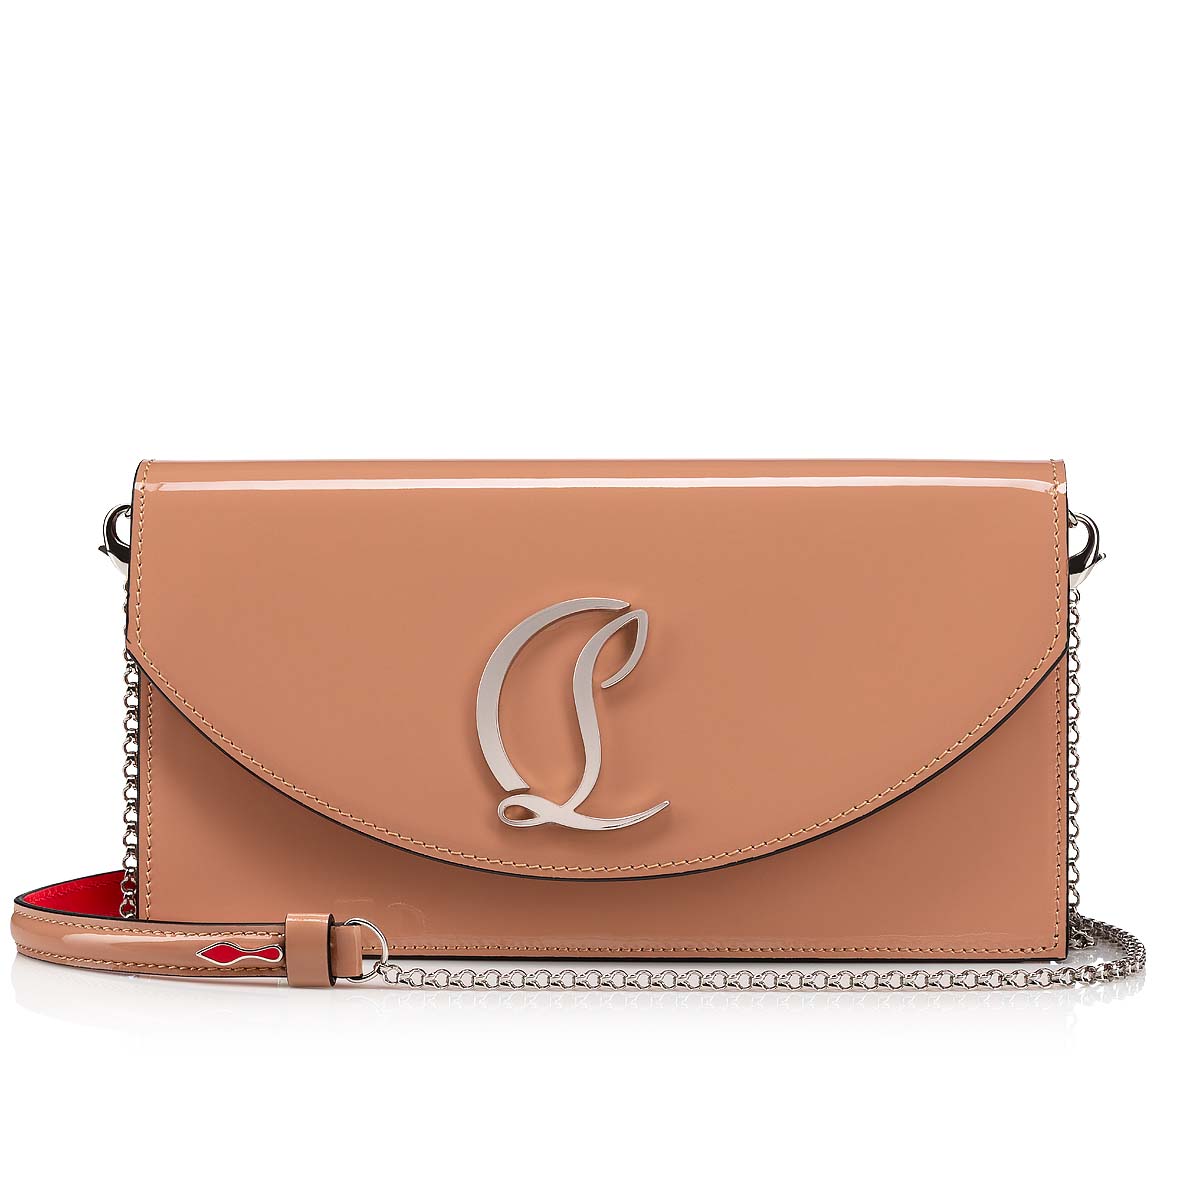 rigdom Maiden amme Loubi54 - Clutch - Patent calf and metal - Nude - Christian Louboutin